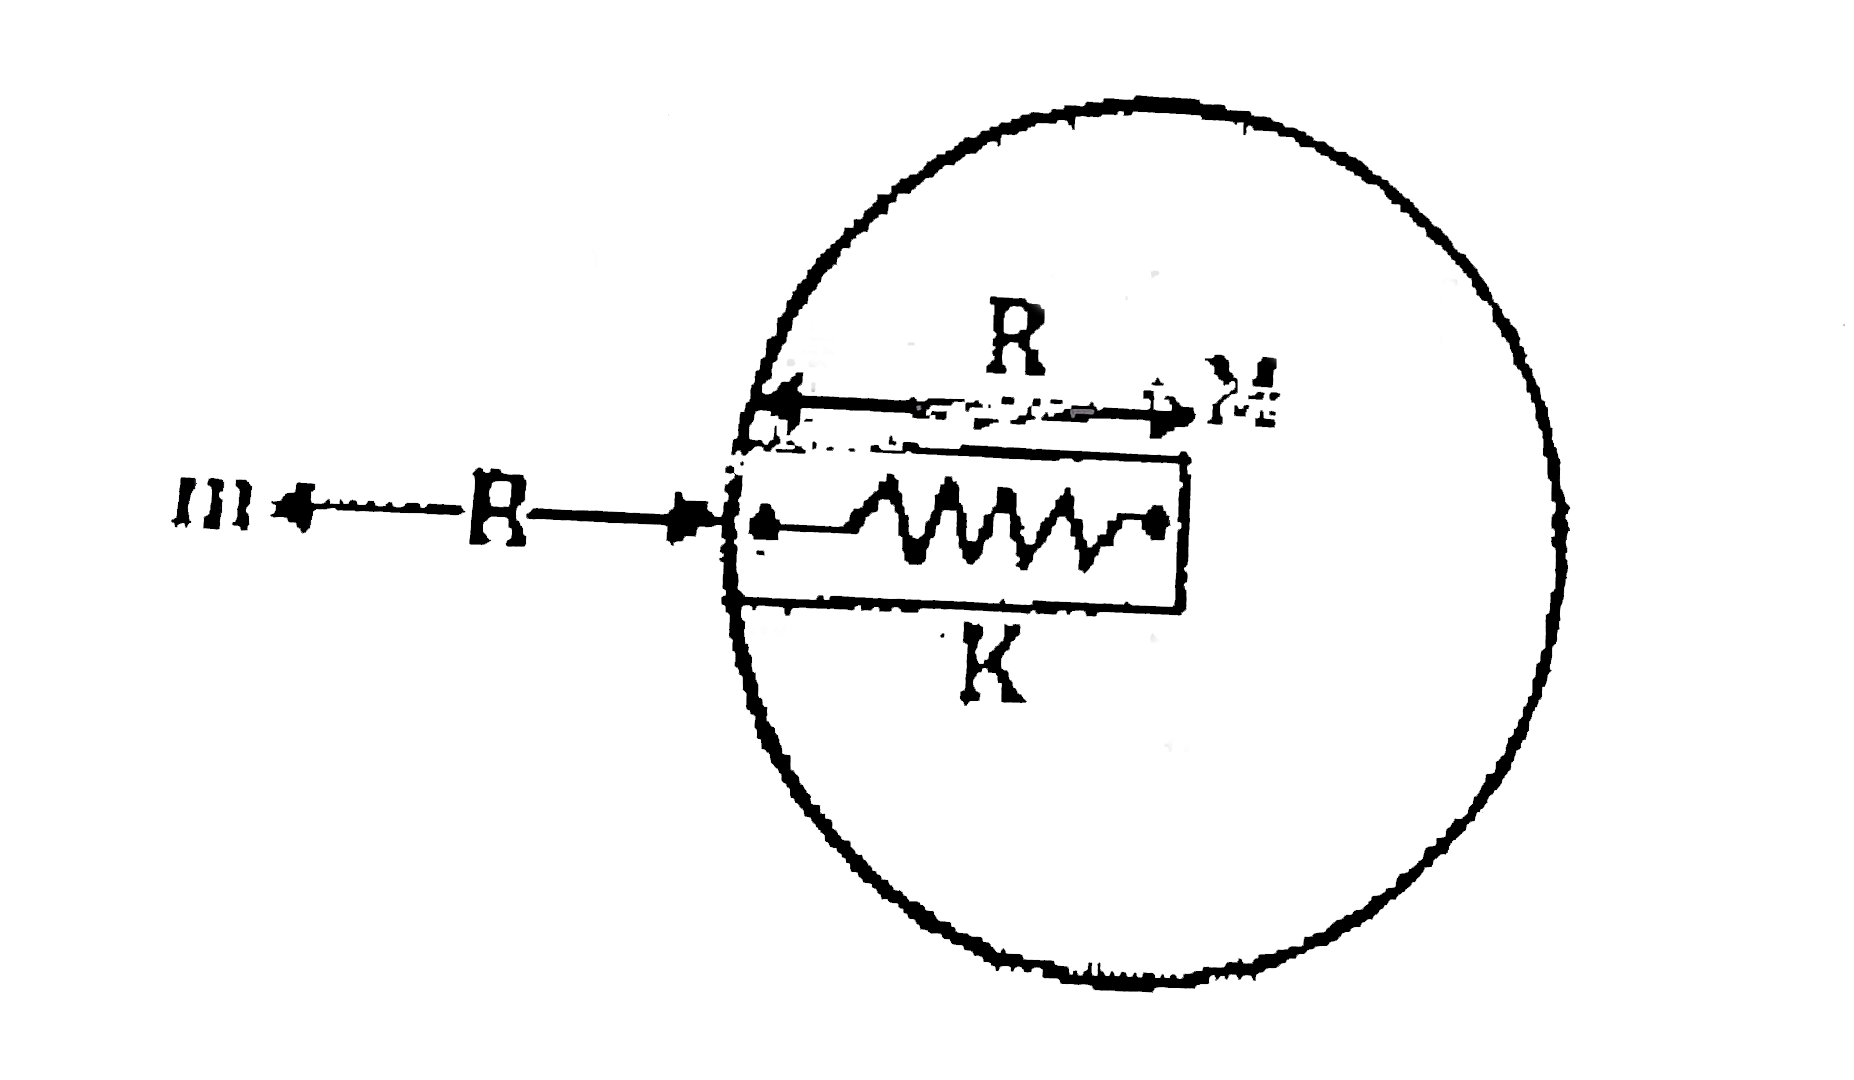 A small ball of mass 'm' is released at a height 'R' above the earth surface, as shown in the figure. If the maximum depth of the ball to which it goes is R/2 inside the earth through a narrow grove before coming to rest momentarily. the grove, contain an ideal spring of spring constant K and natural length R, the value of K is (R is radius of Earth and M mass of Earth)